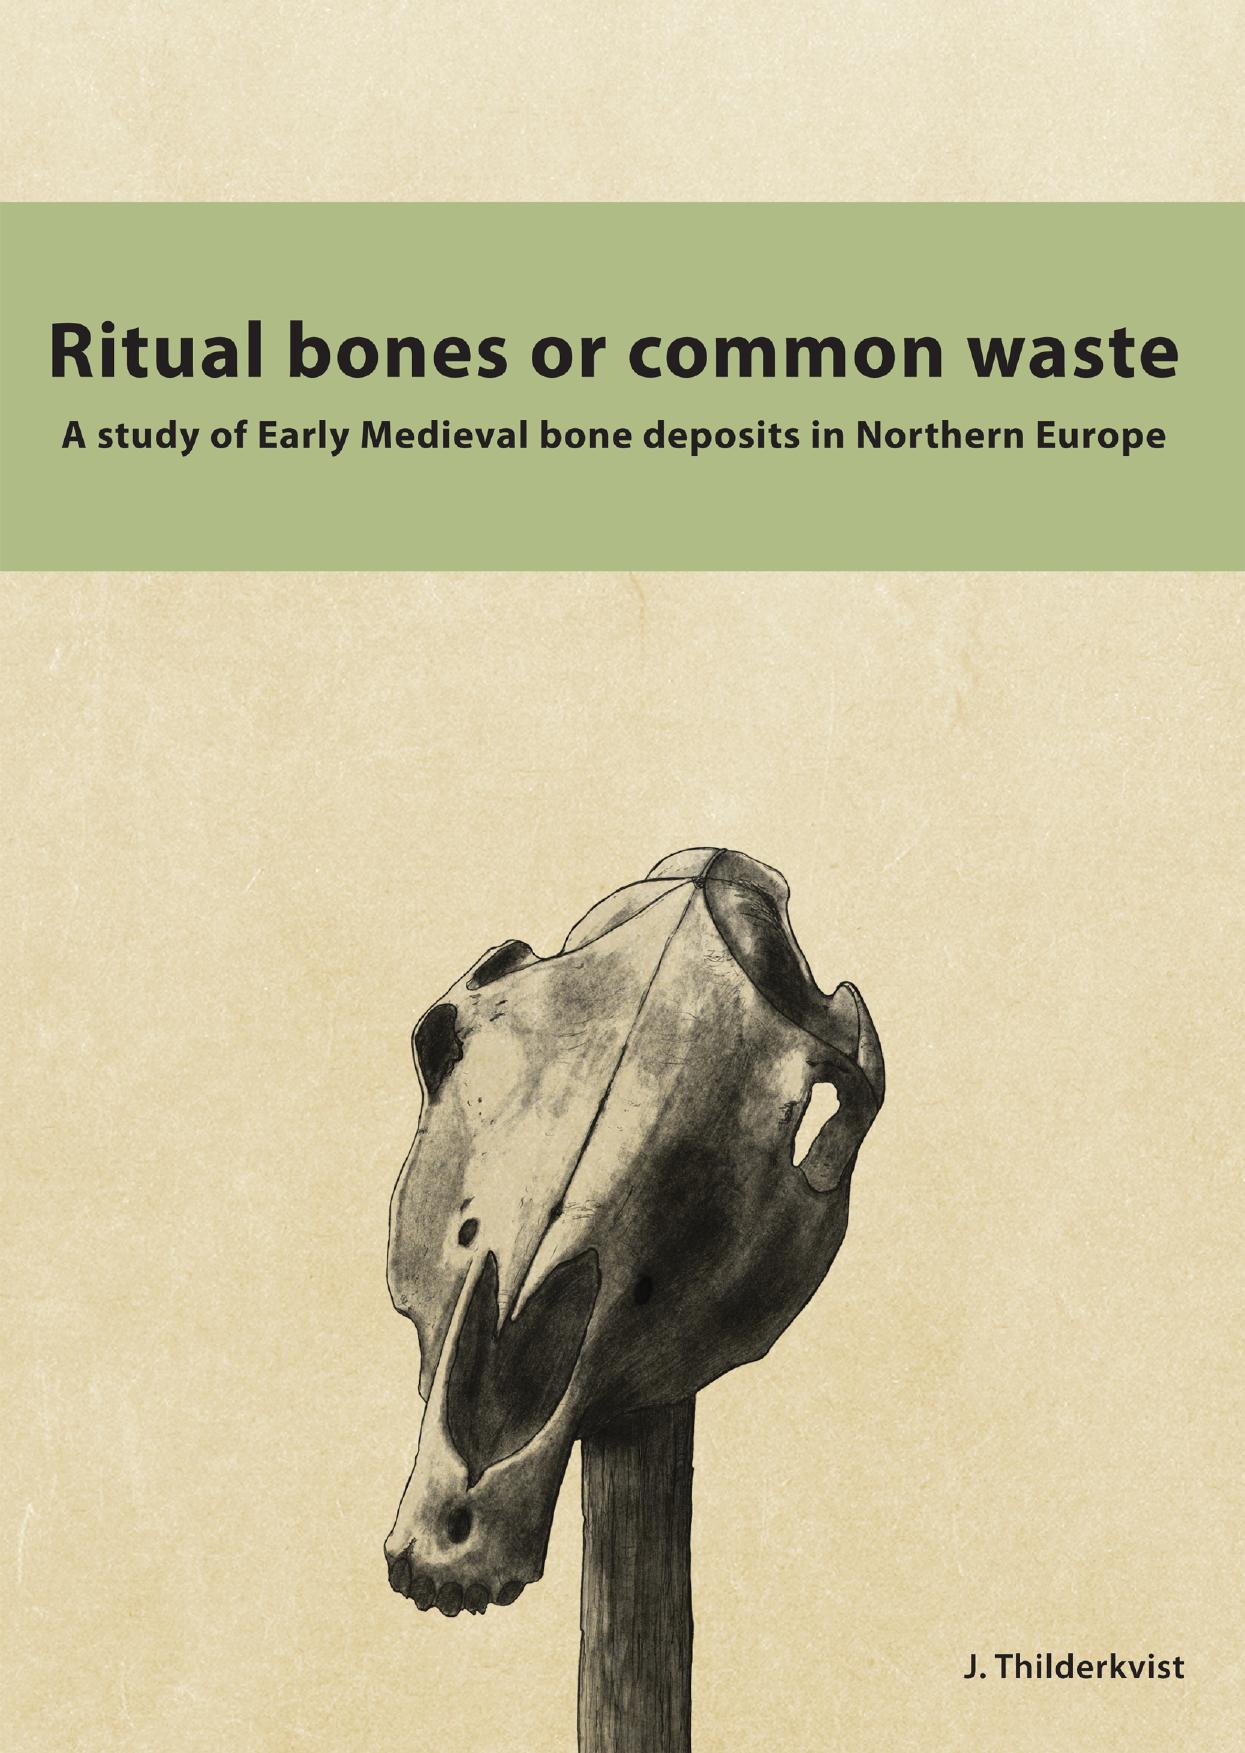 Ritual Bones or Common Waste: A Study of Early Medieval Bone Deposits in Northern Europe by J. Thilderkvist